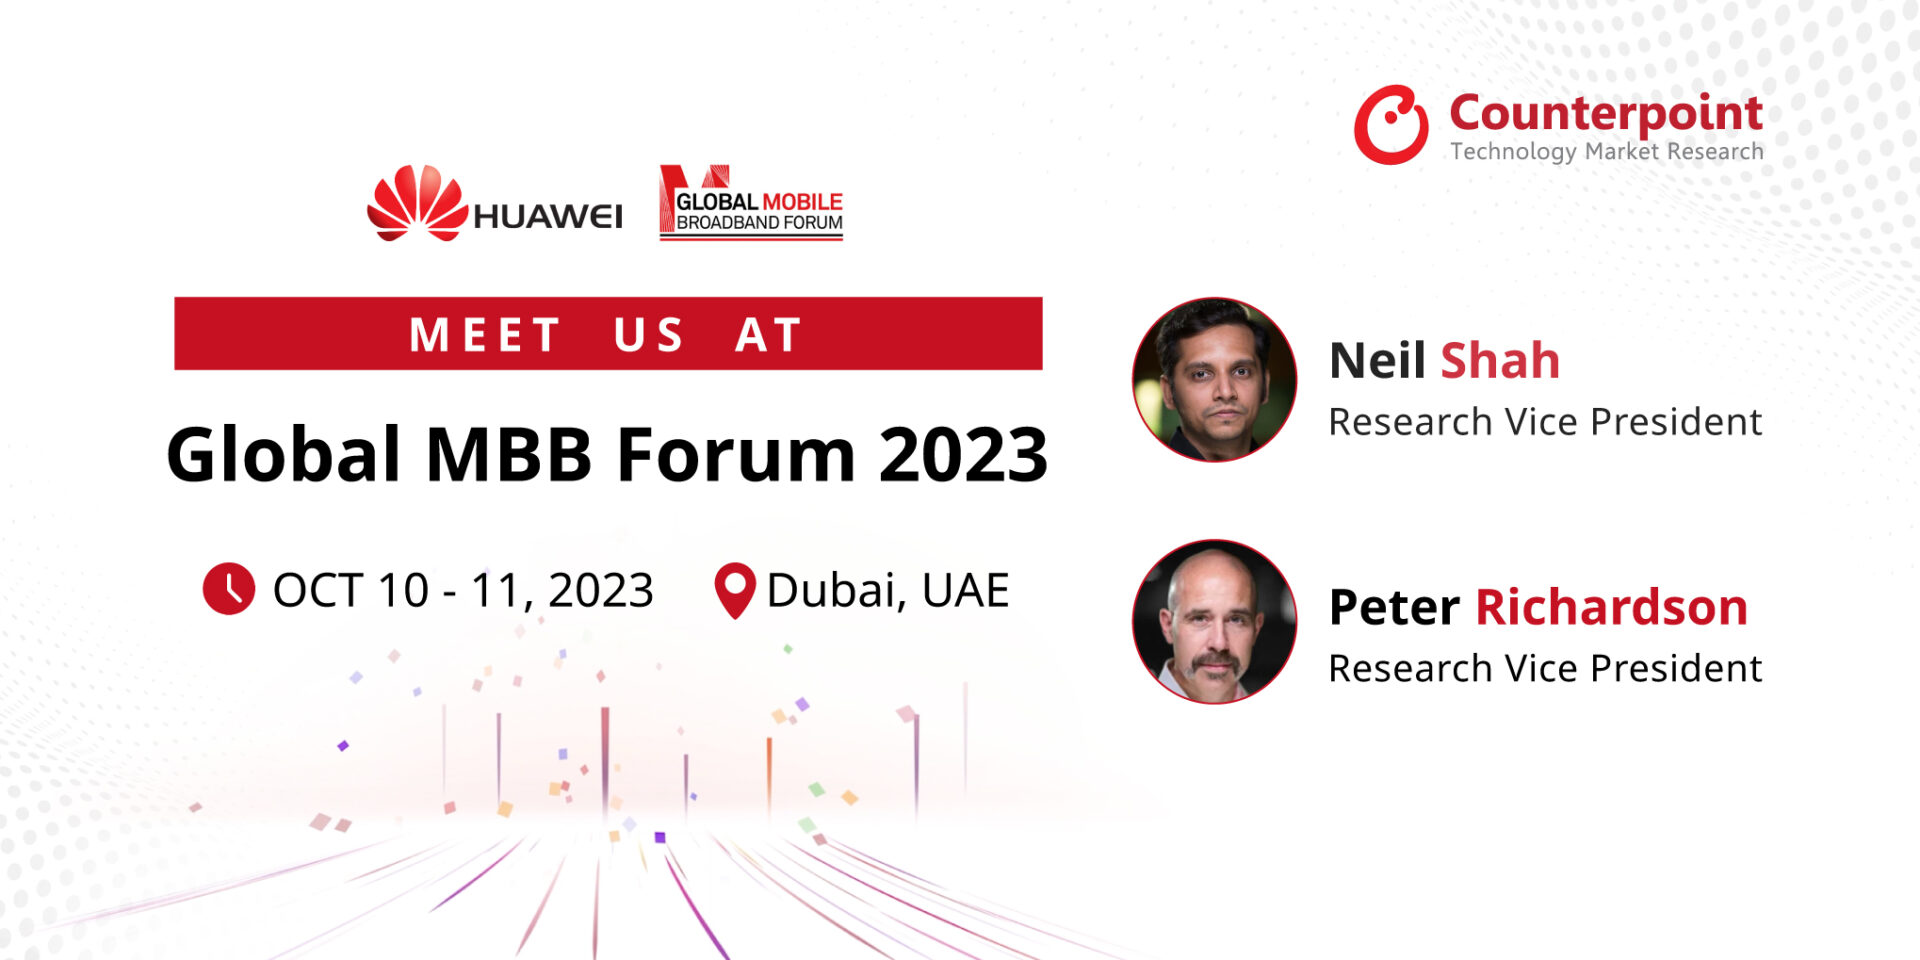 Meet Counterpoint at Global Mobile Broadband Forum 2023